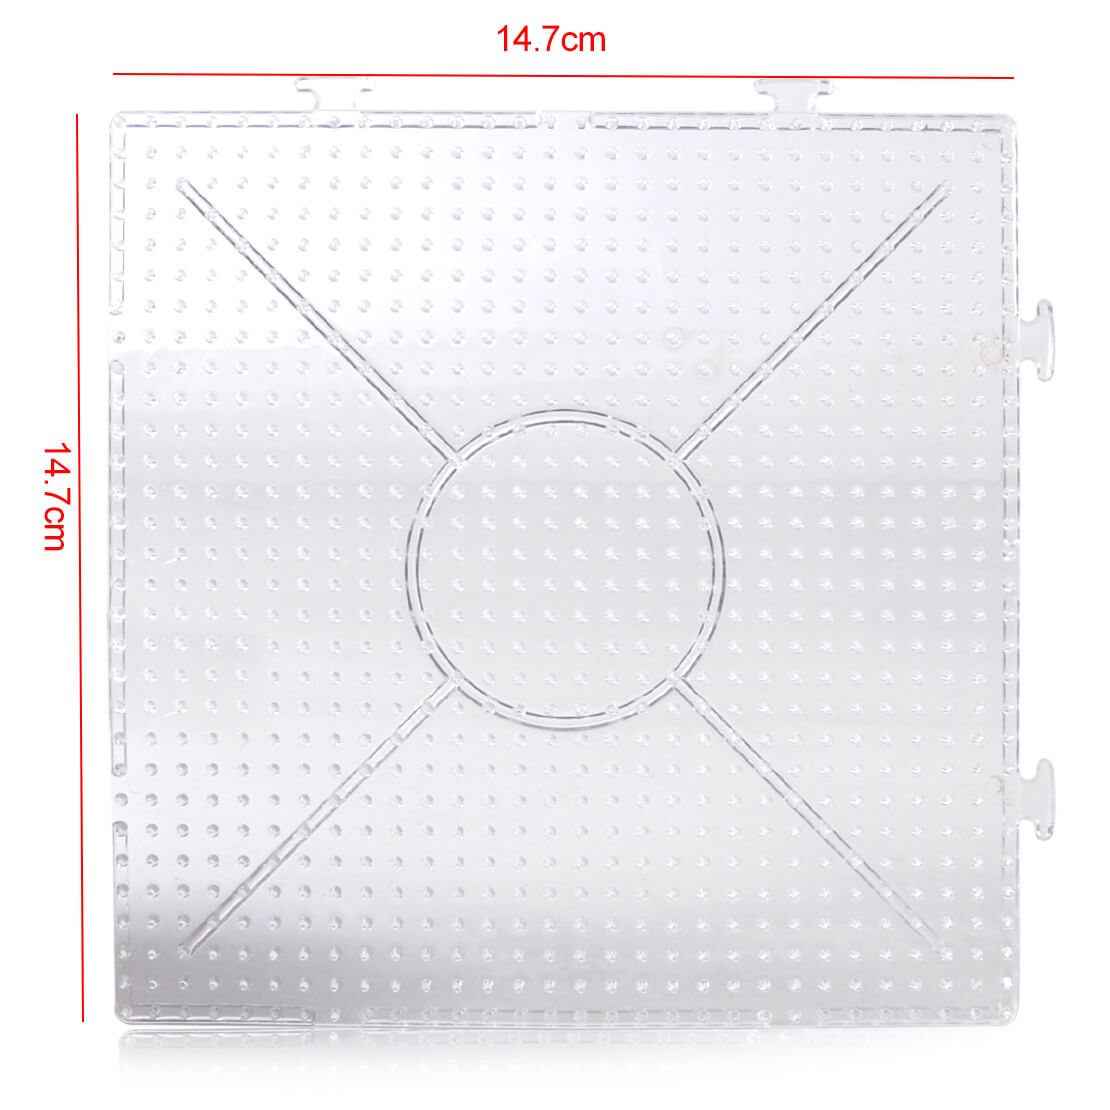 Details About Square Fusion Pegboard Template Replacement Fit Hama Perler  Beads 14.7* 14.7Cm With Blank Perler Bead Template